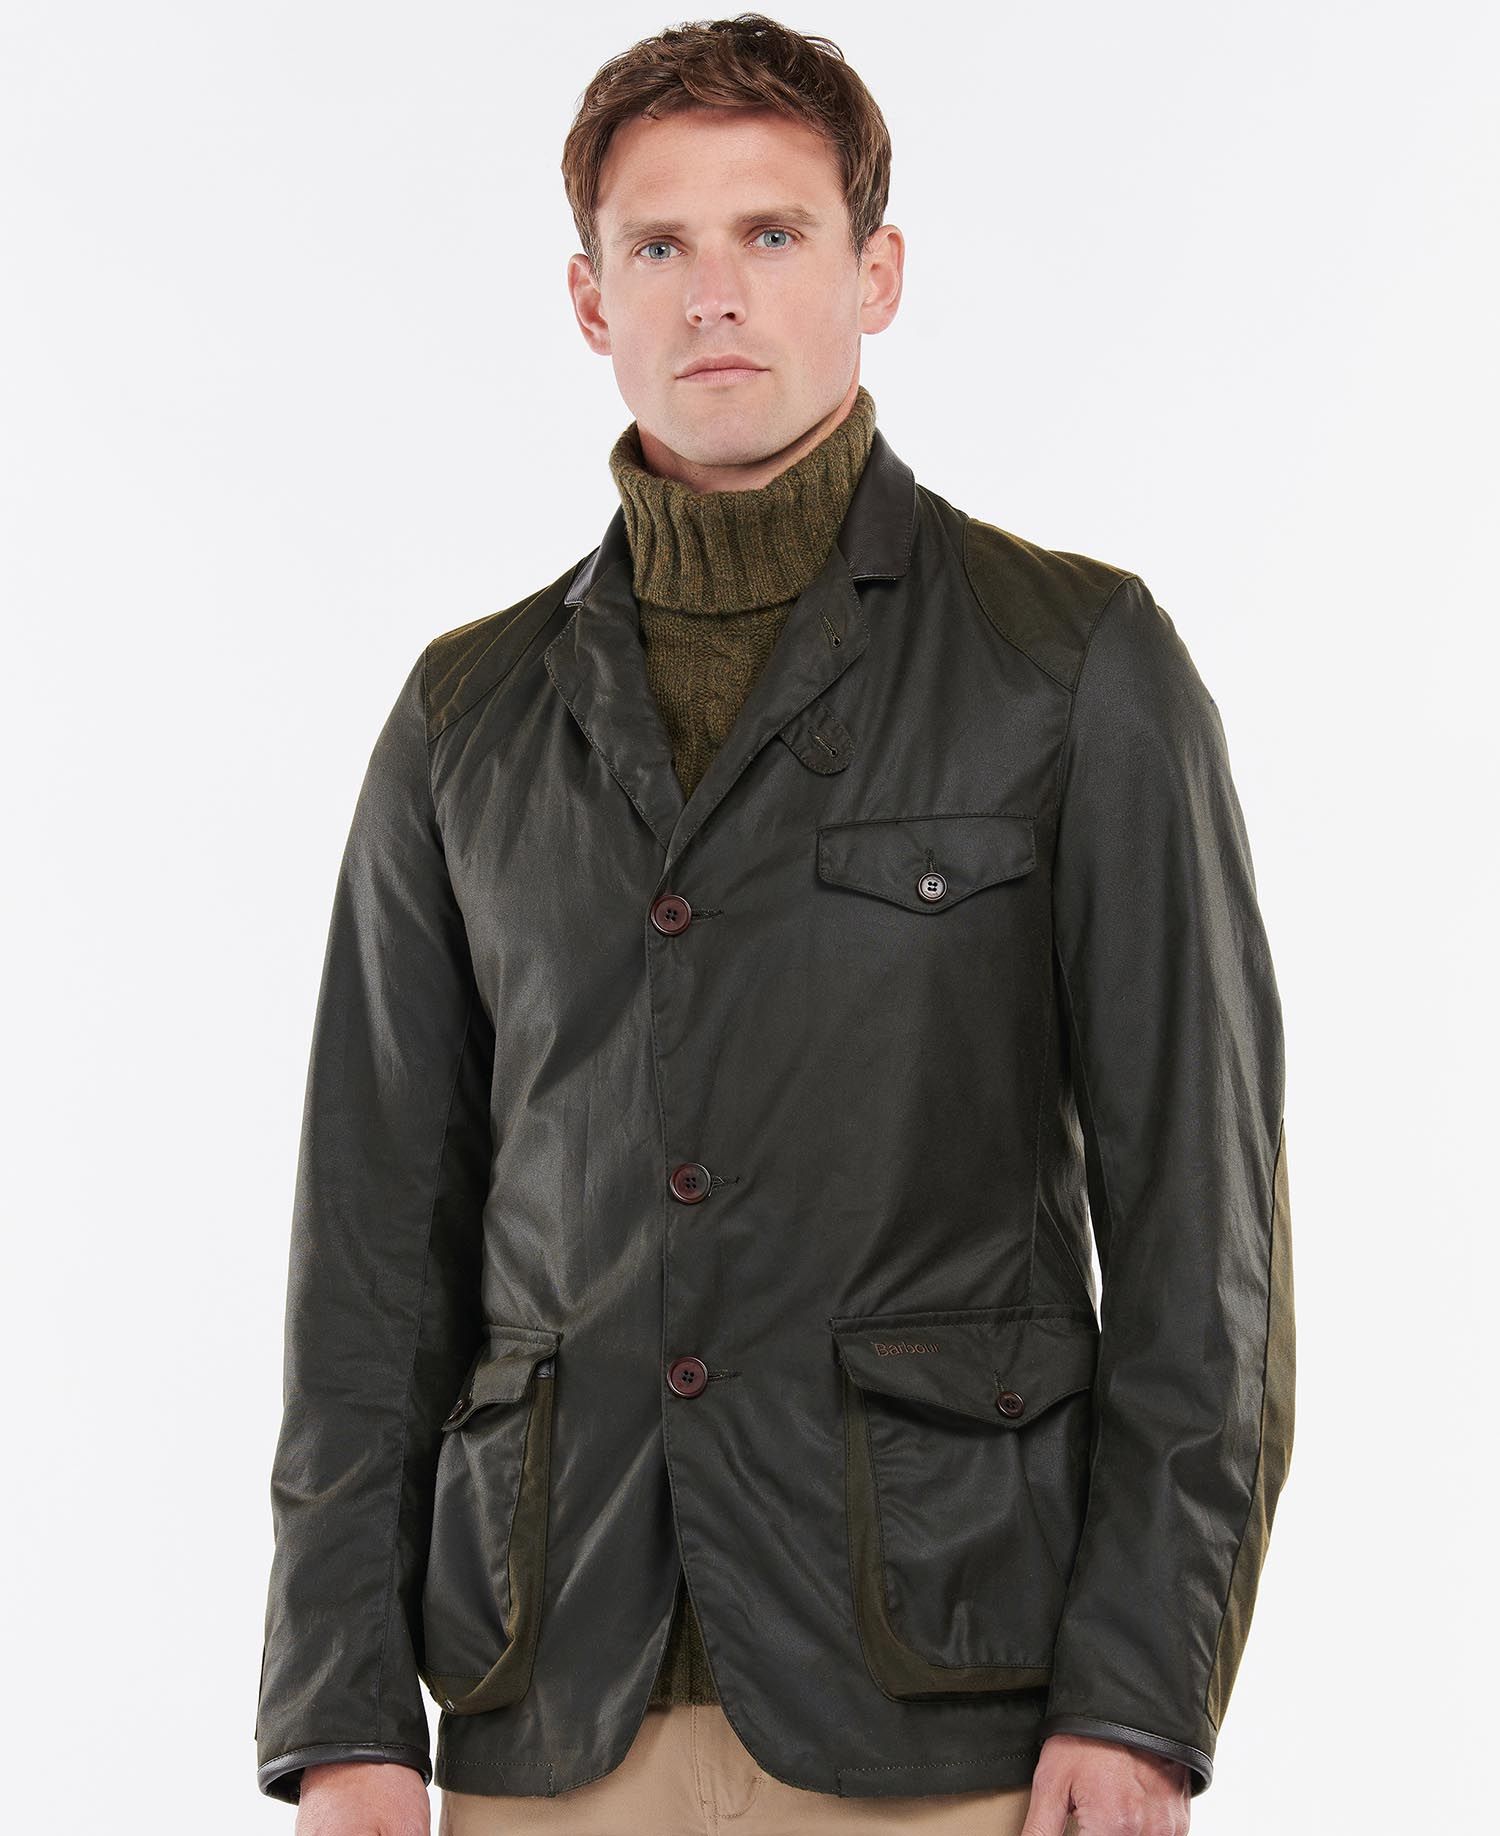 Barbour Beacon Sports Jacket in Olive | Barbour International